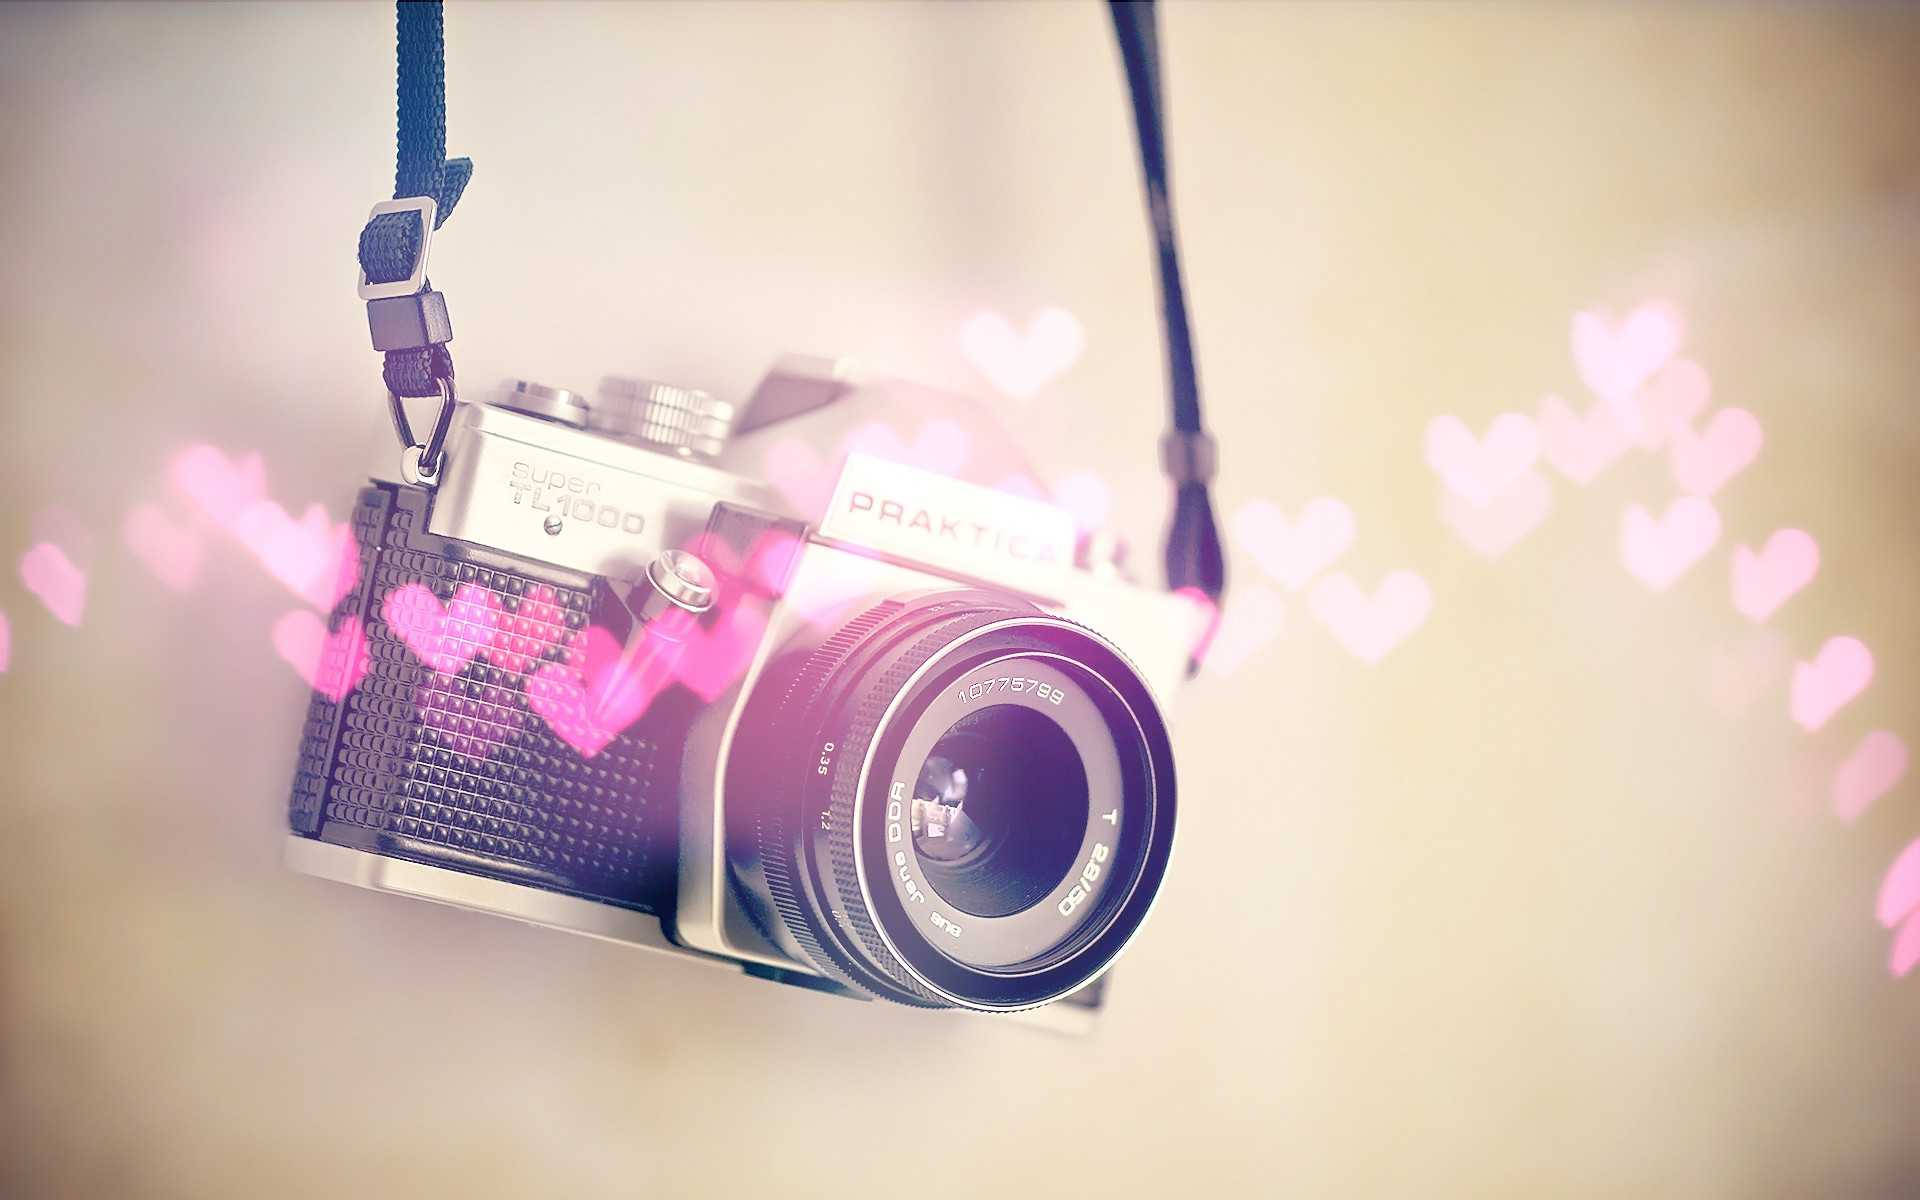 Take pictures with style and make memories! Wallpaper